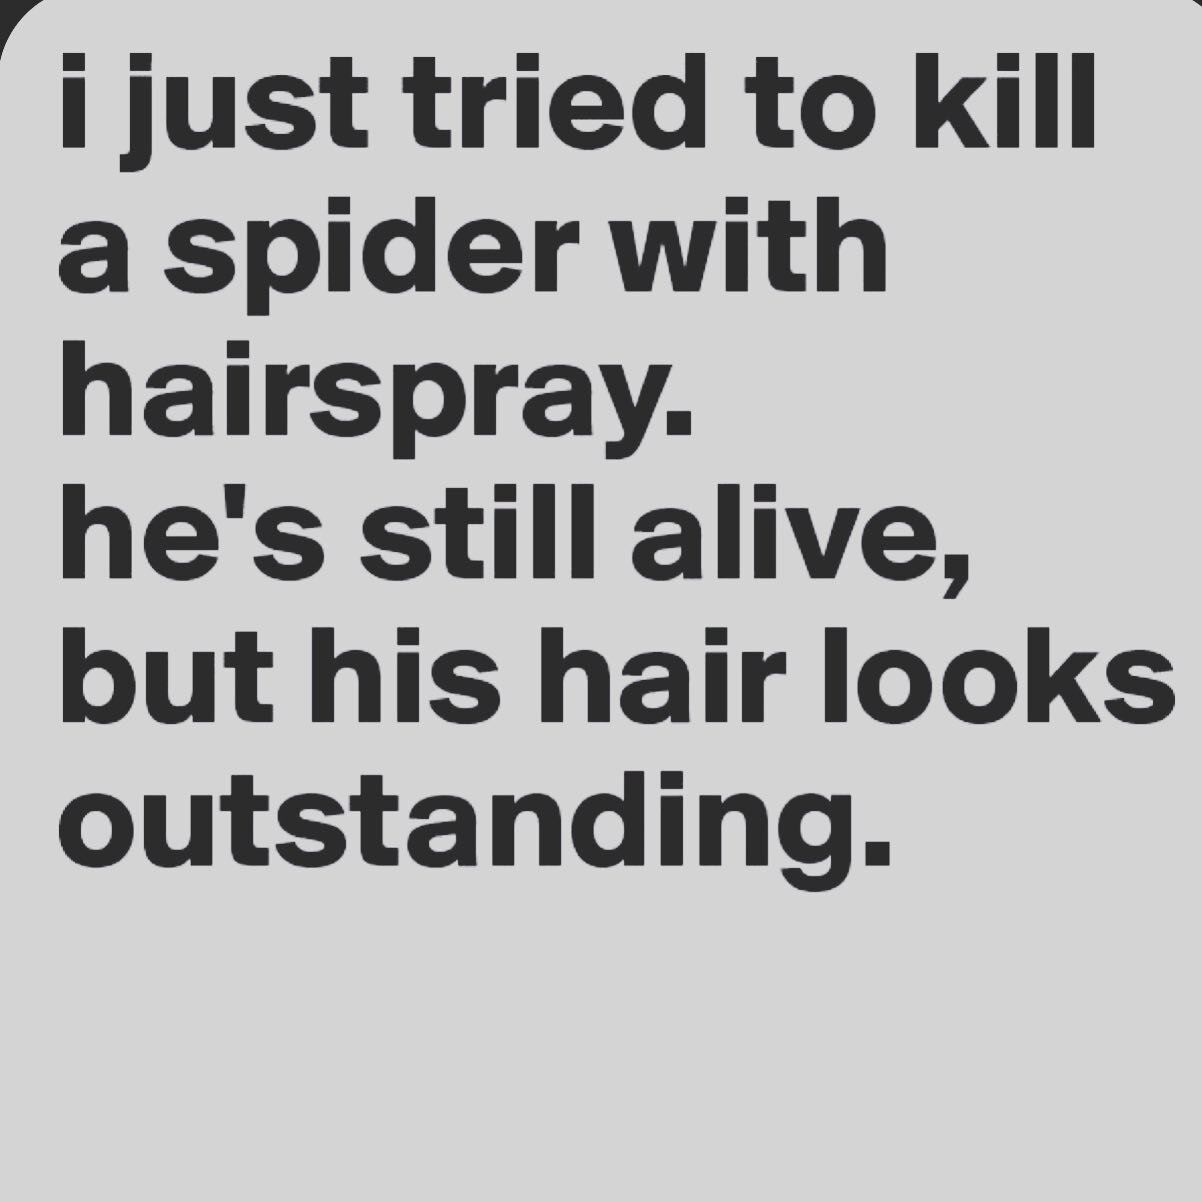 𝕴 𝖆𝖒 𝖘𝖔 𝖌𝖚𝖎𝖑𝖙𝖞 😂🕷
.
.
.
.
.
.
.
📲inbloom101.com for online booking 
.
.
.
#inbloom101 #salonowner #seattlehairstylist #salonlife #curlyhair #hairsalon #seattlebalayage #balayagespecialist #haircare #naturalbeauty  #hairstylist #obsessed